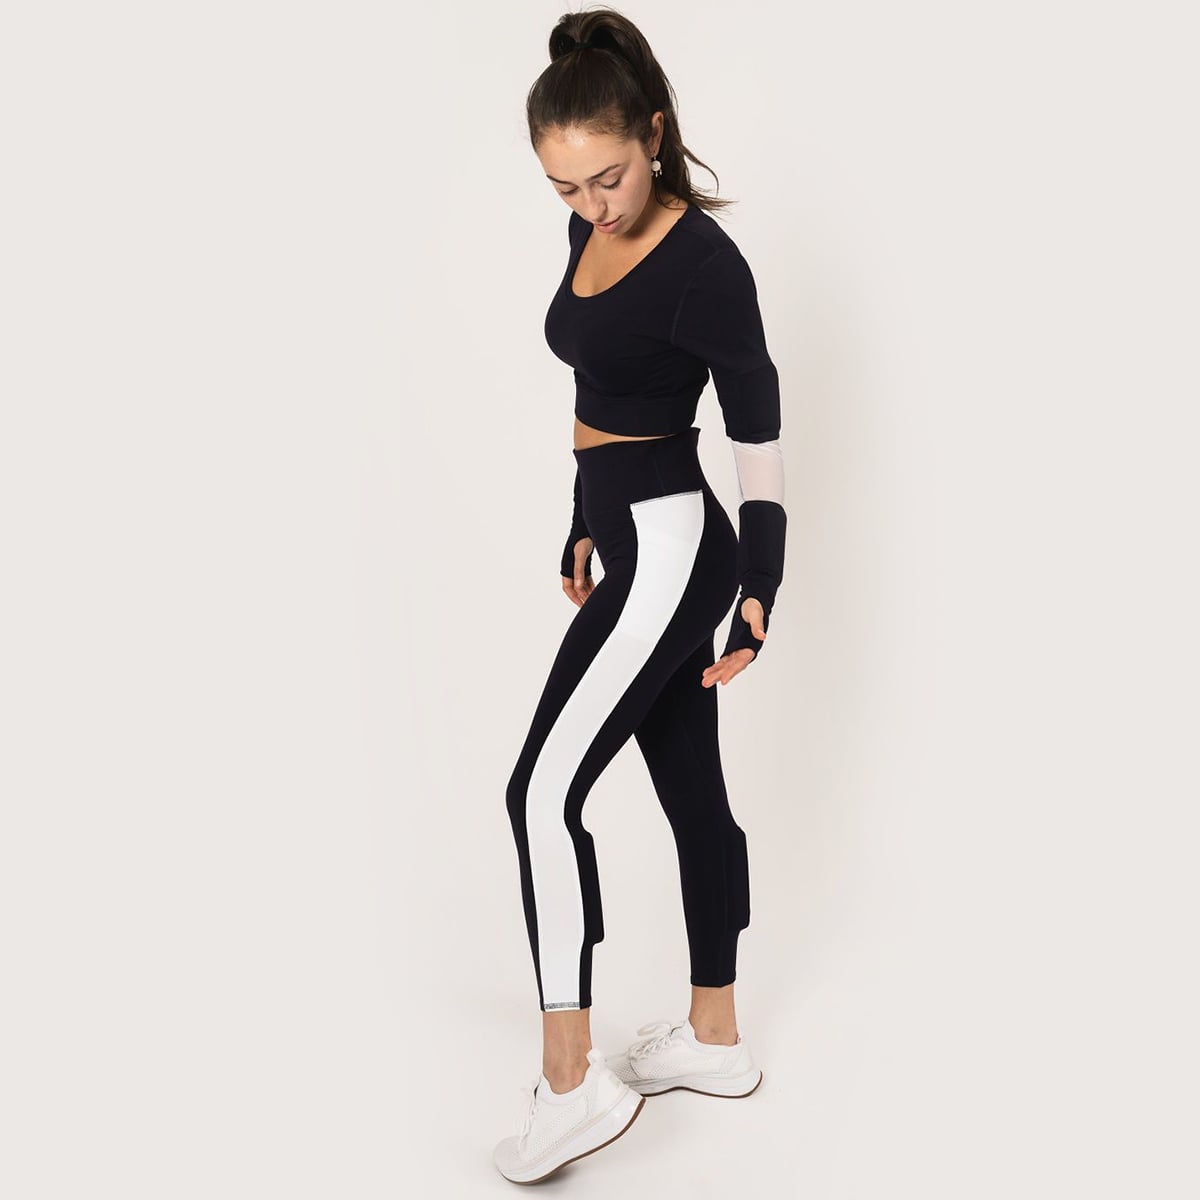 Women's Booty Lift Weighted Legging